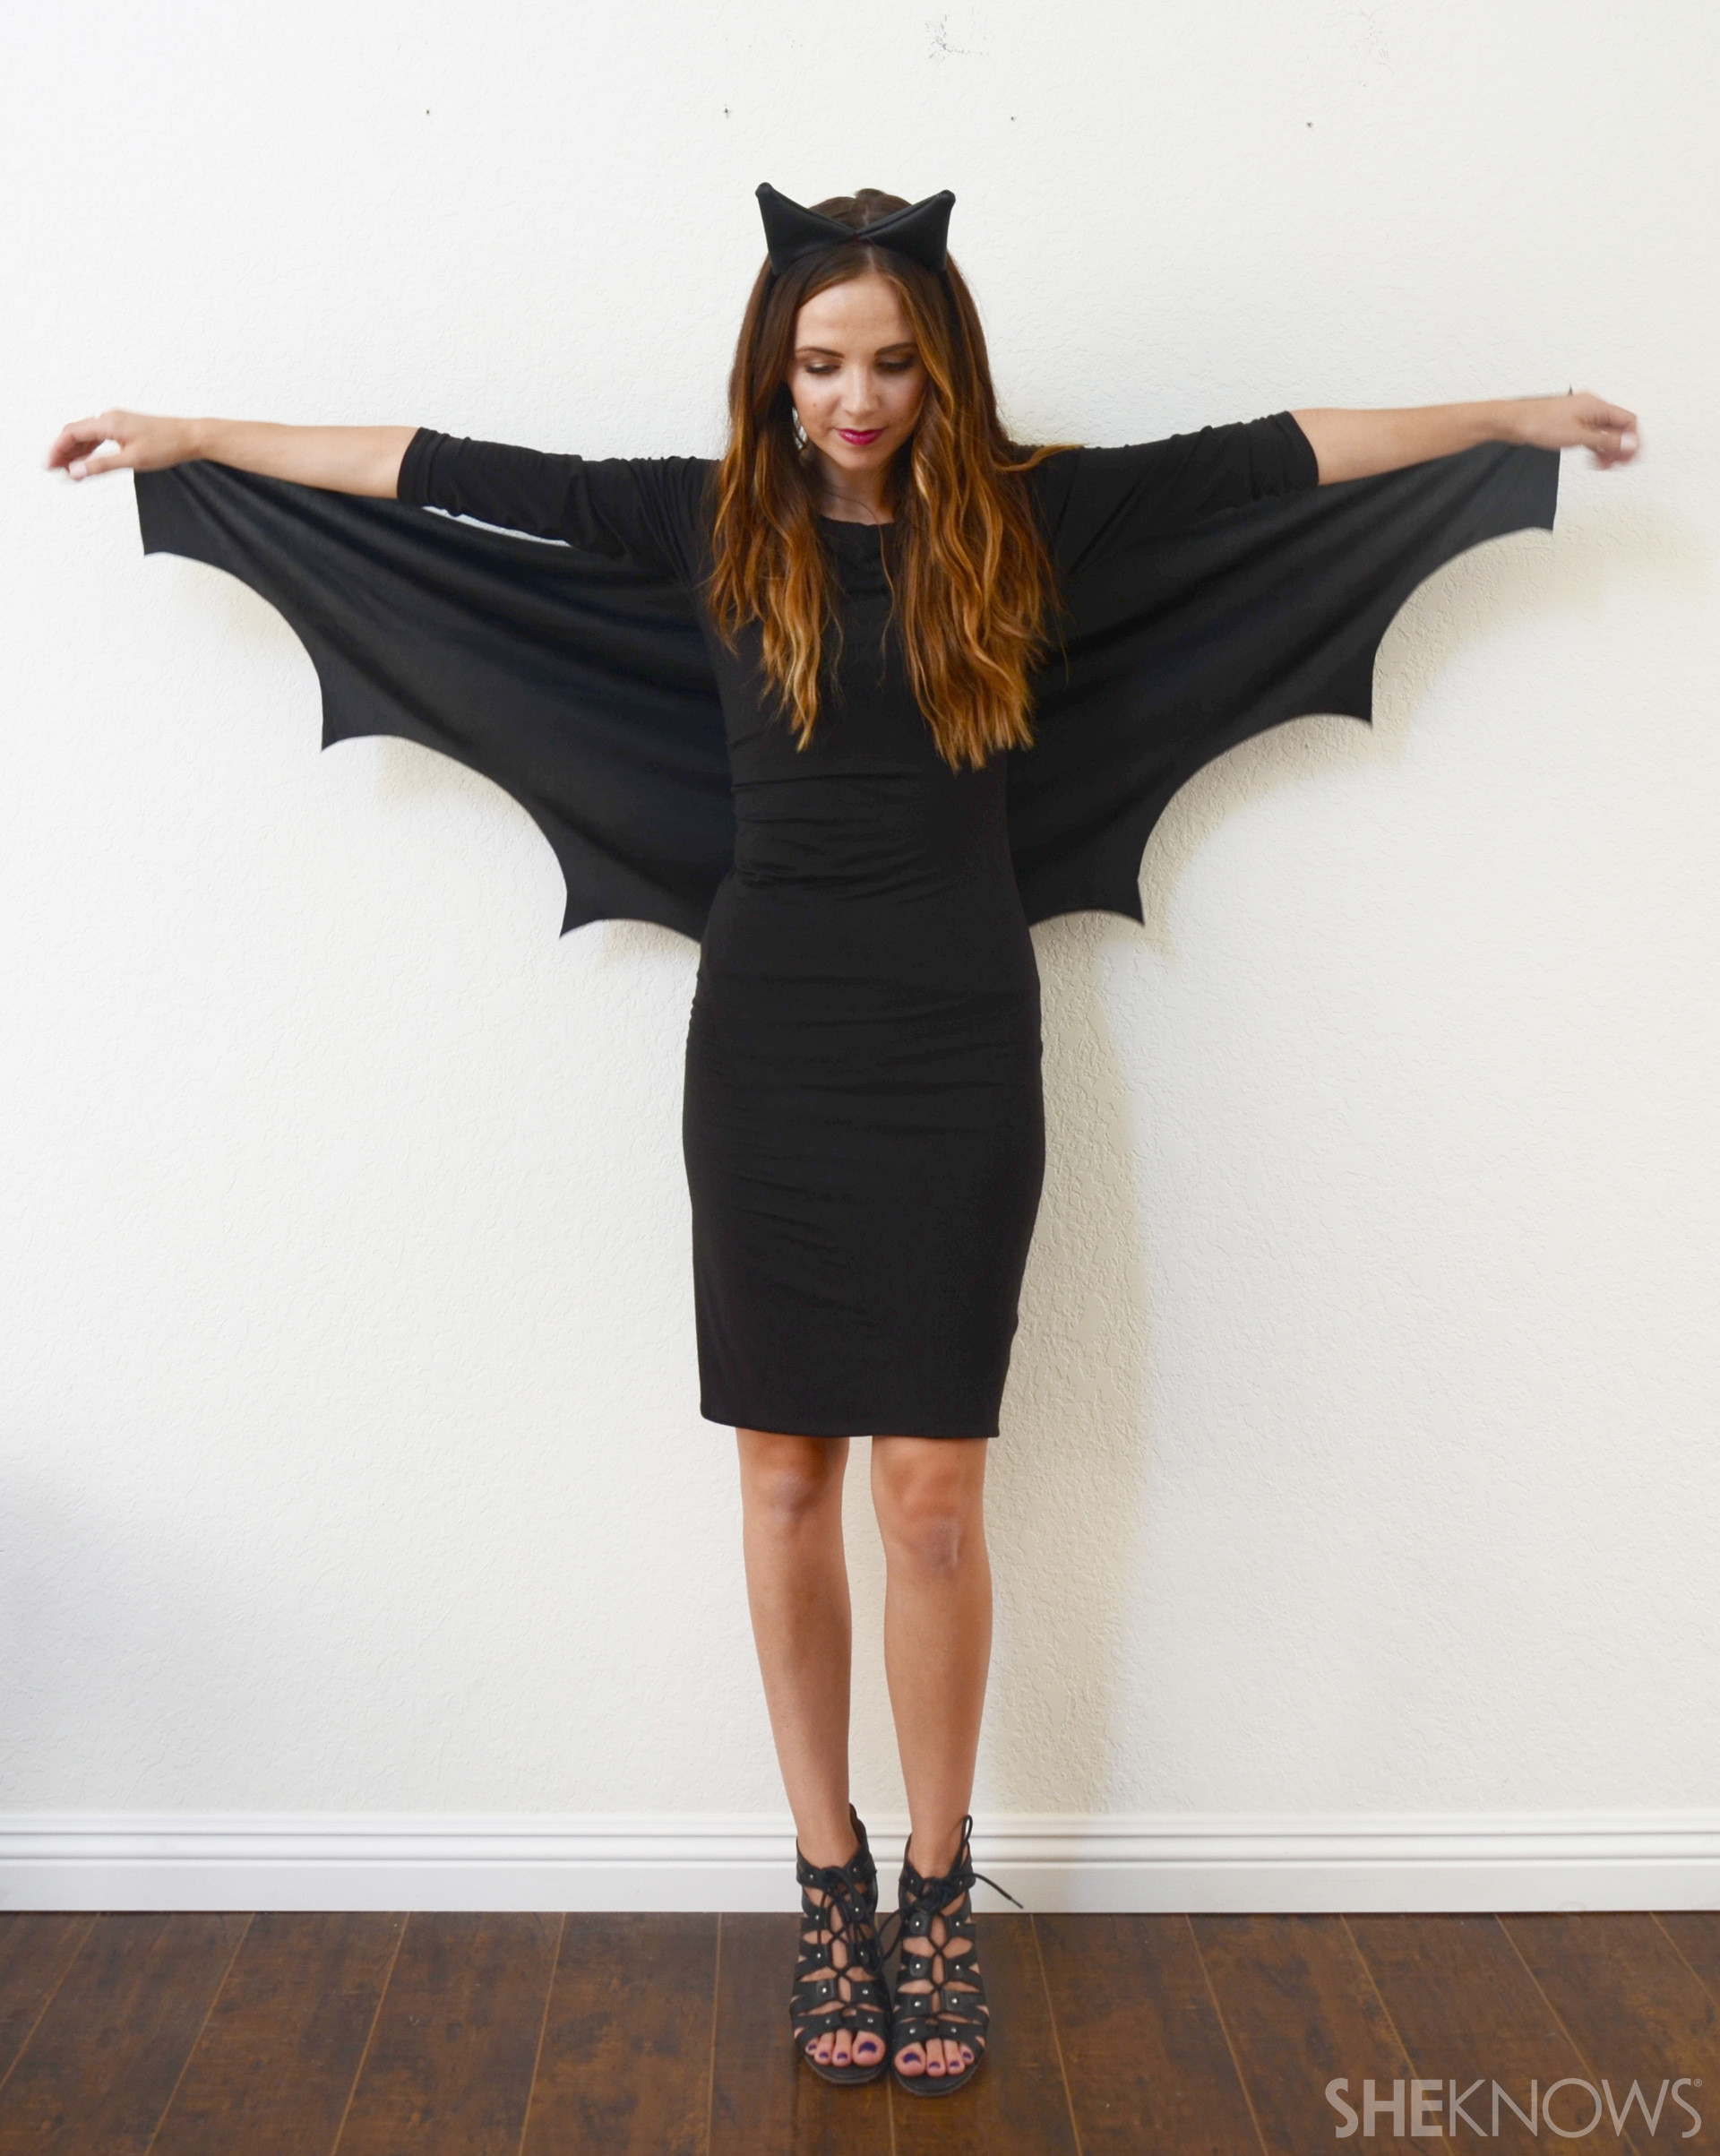 DIY Woman Halloween Costume Ideas
 A DIY Bat Costume so Easy No e Will Know It ly Took 10